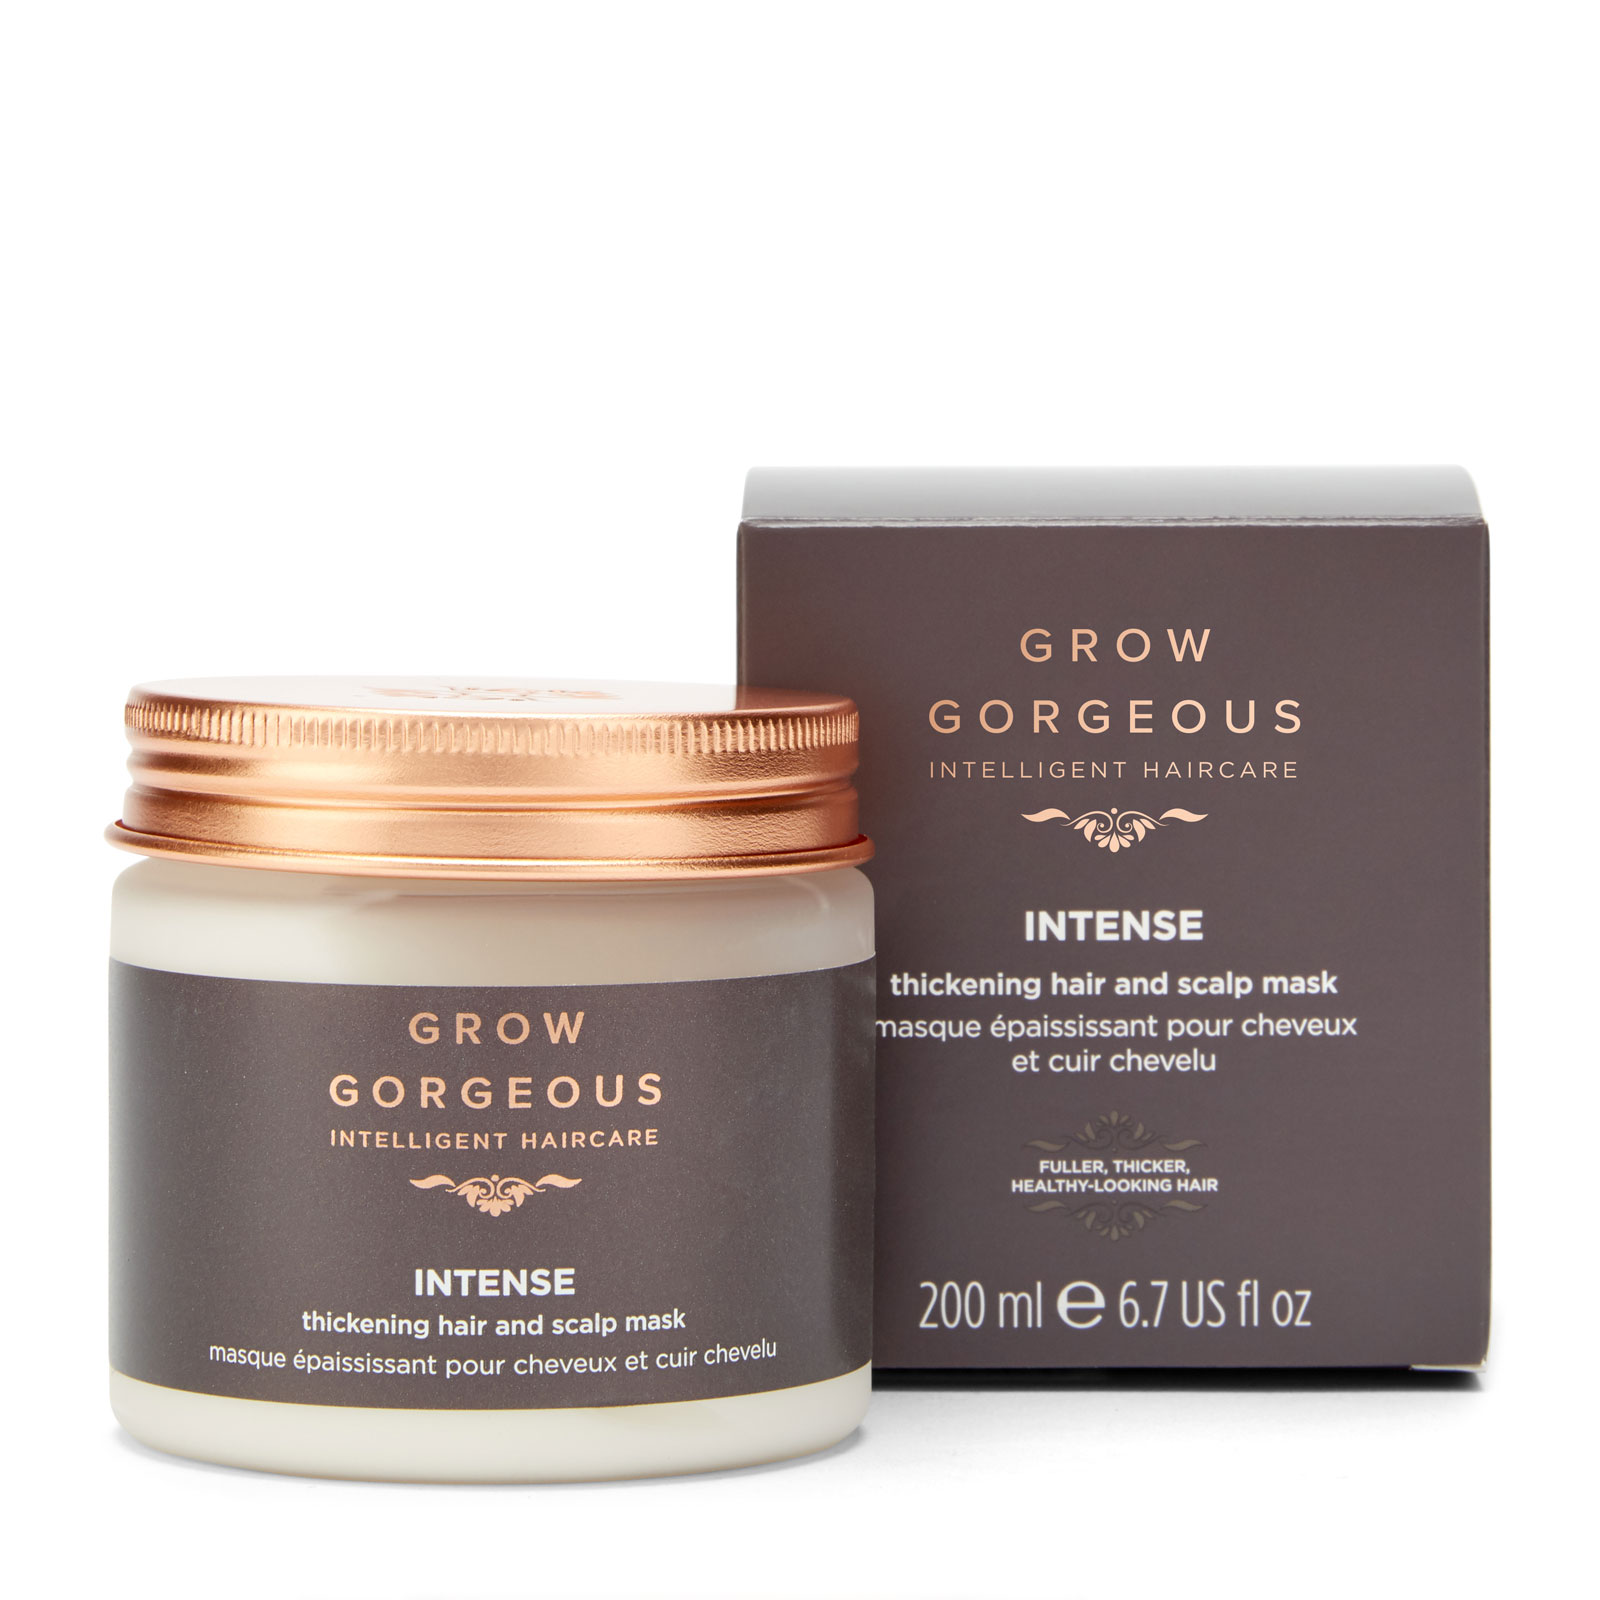 Grow Gorgeous Intense Thickening Hair And Scalp Mask 200Ml